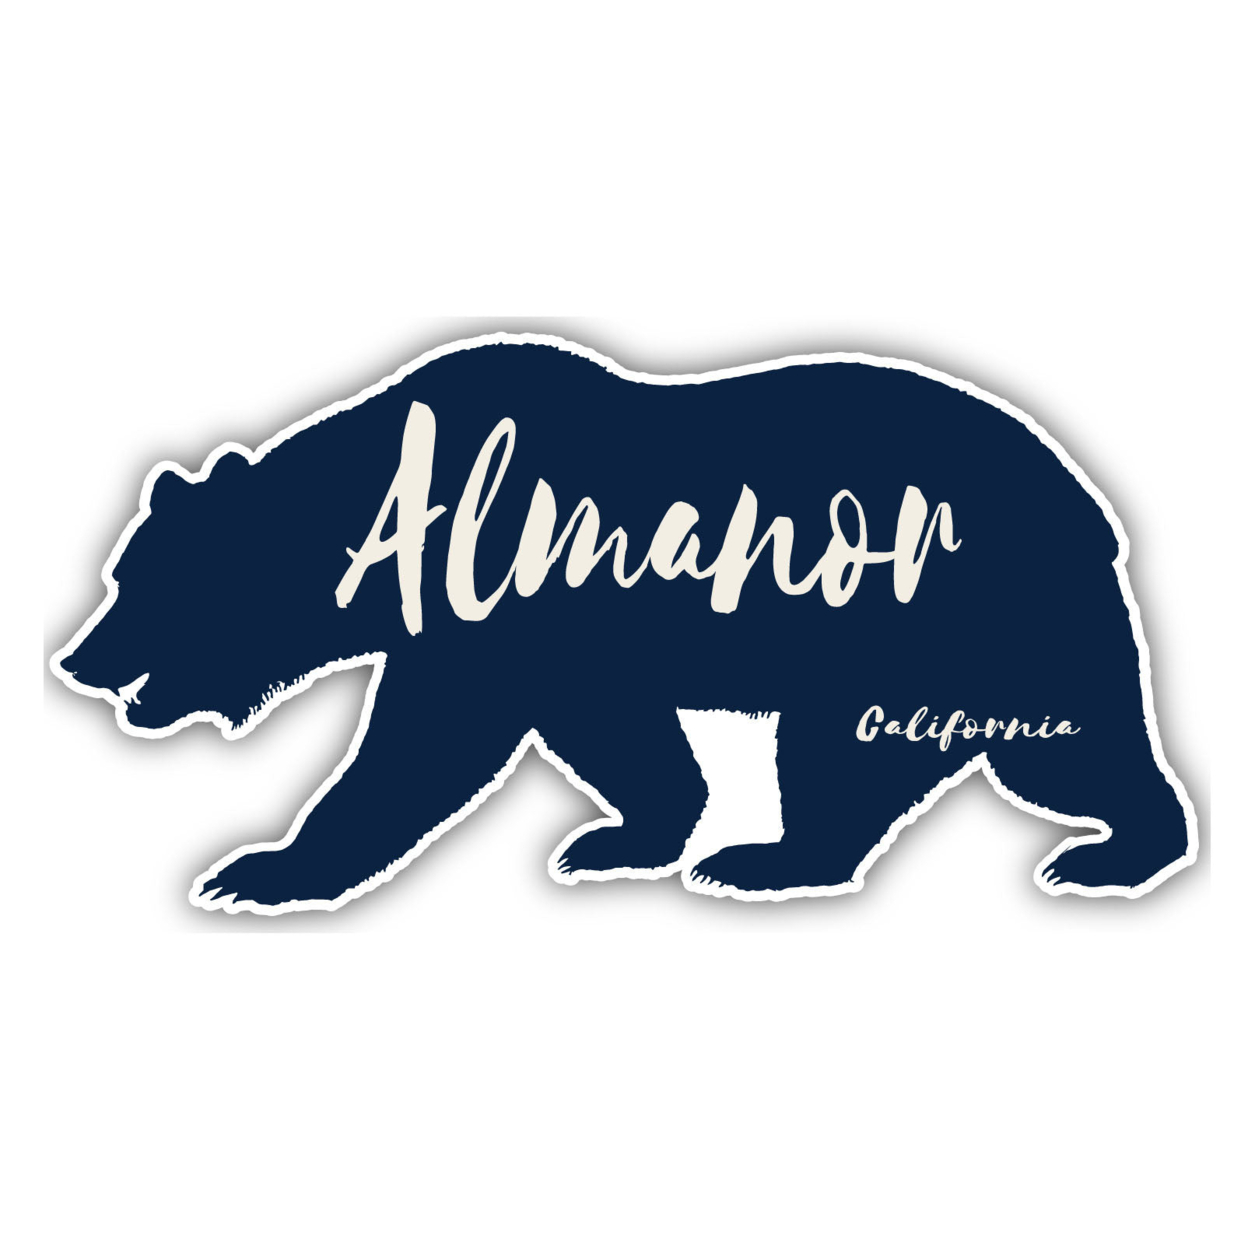 Almanor California Souvenir Decorative Stickers (Choose Theme And Size) - 4-Pack, 12-Inch, Bear